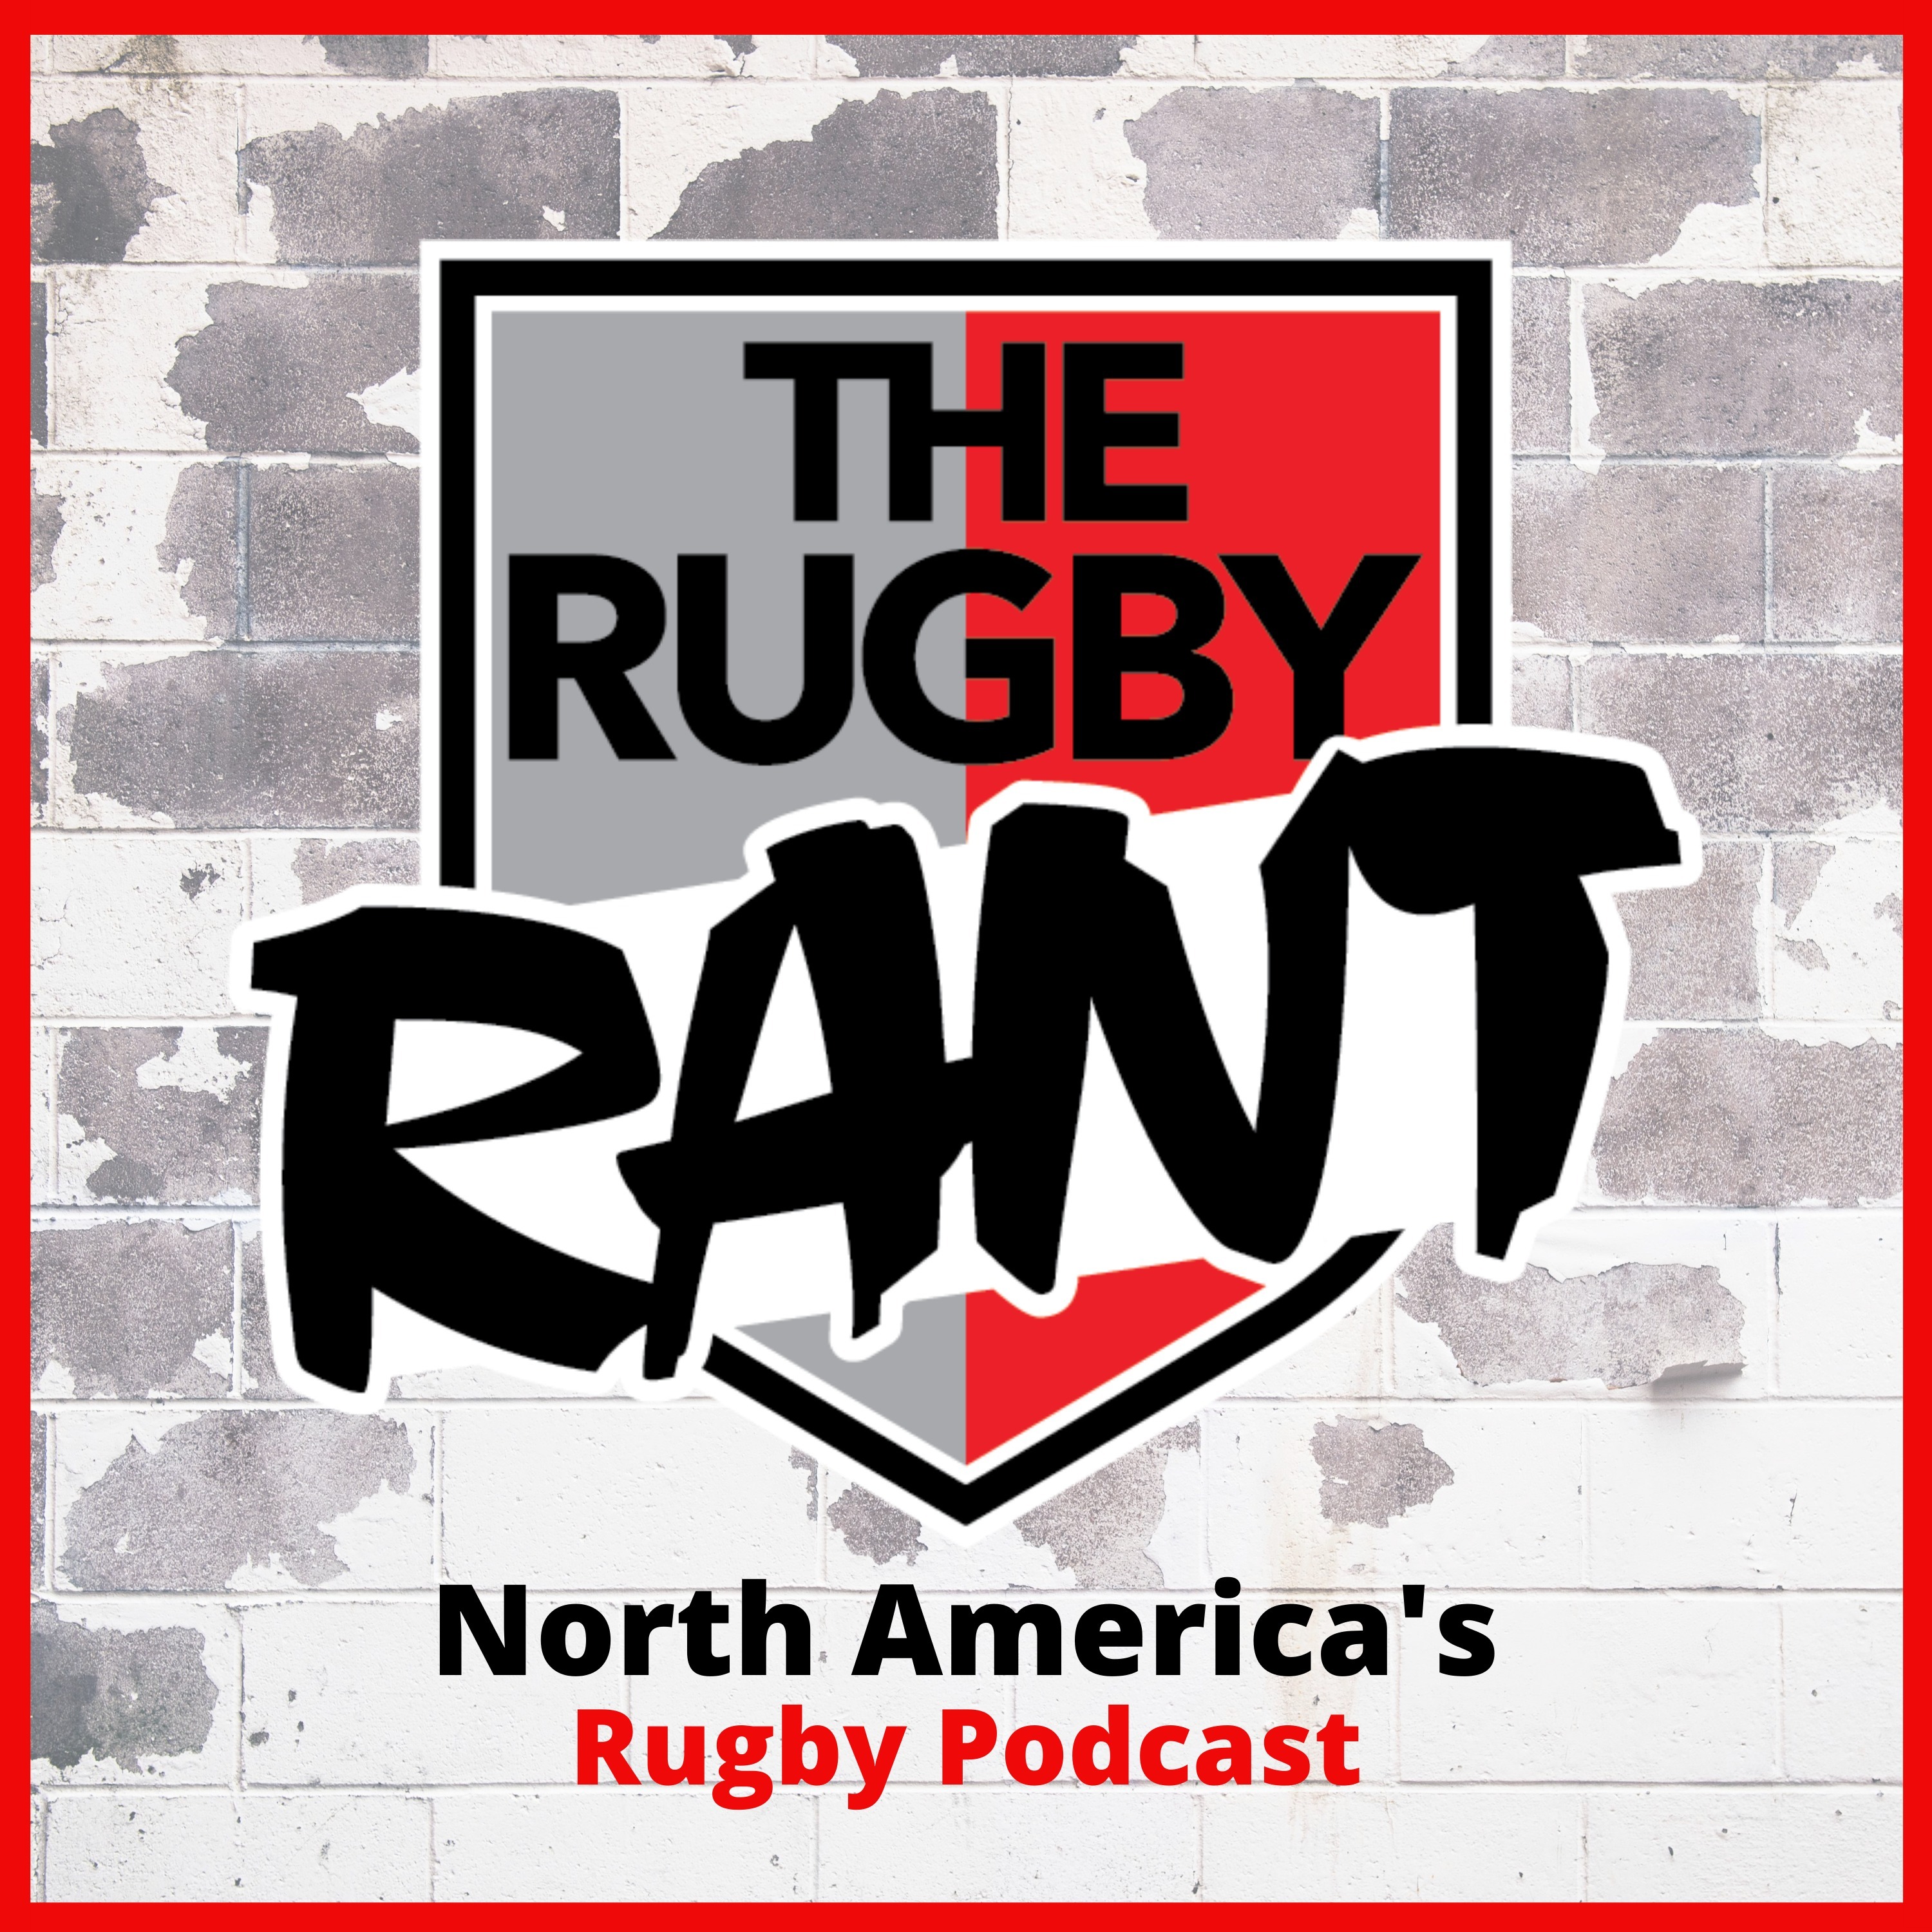 The Rugby Rant - Run, Pass or Kick with Todd Clever